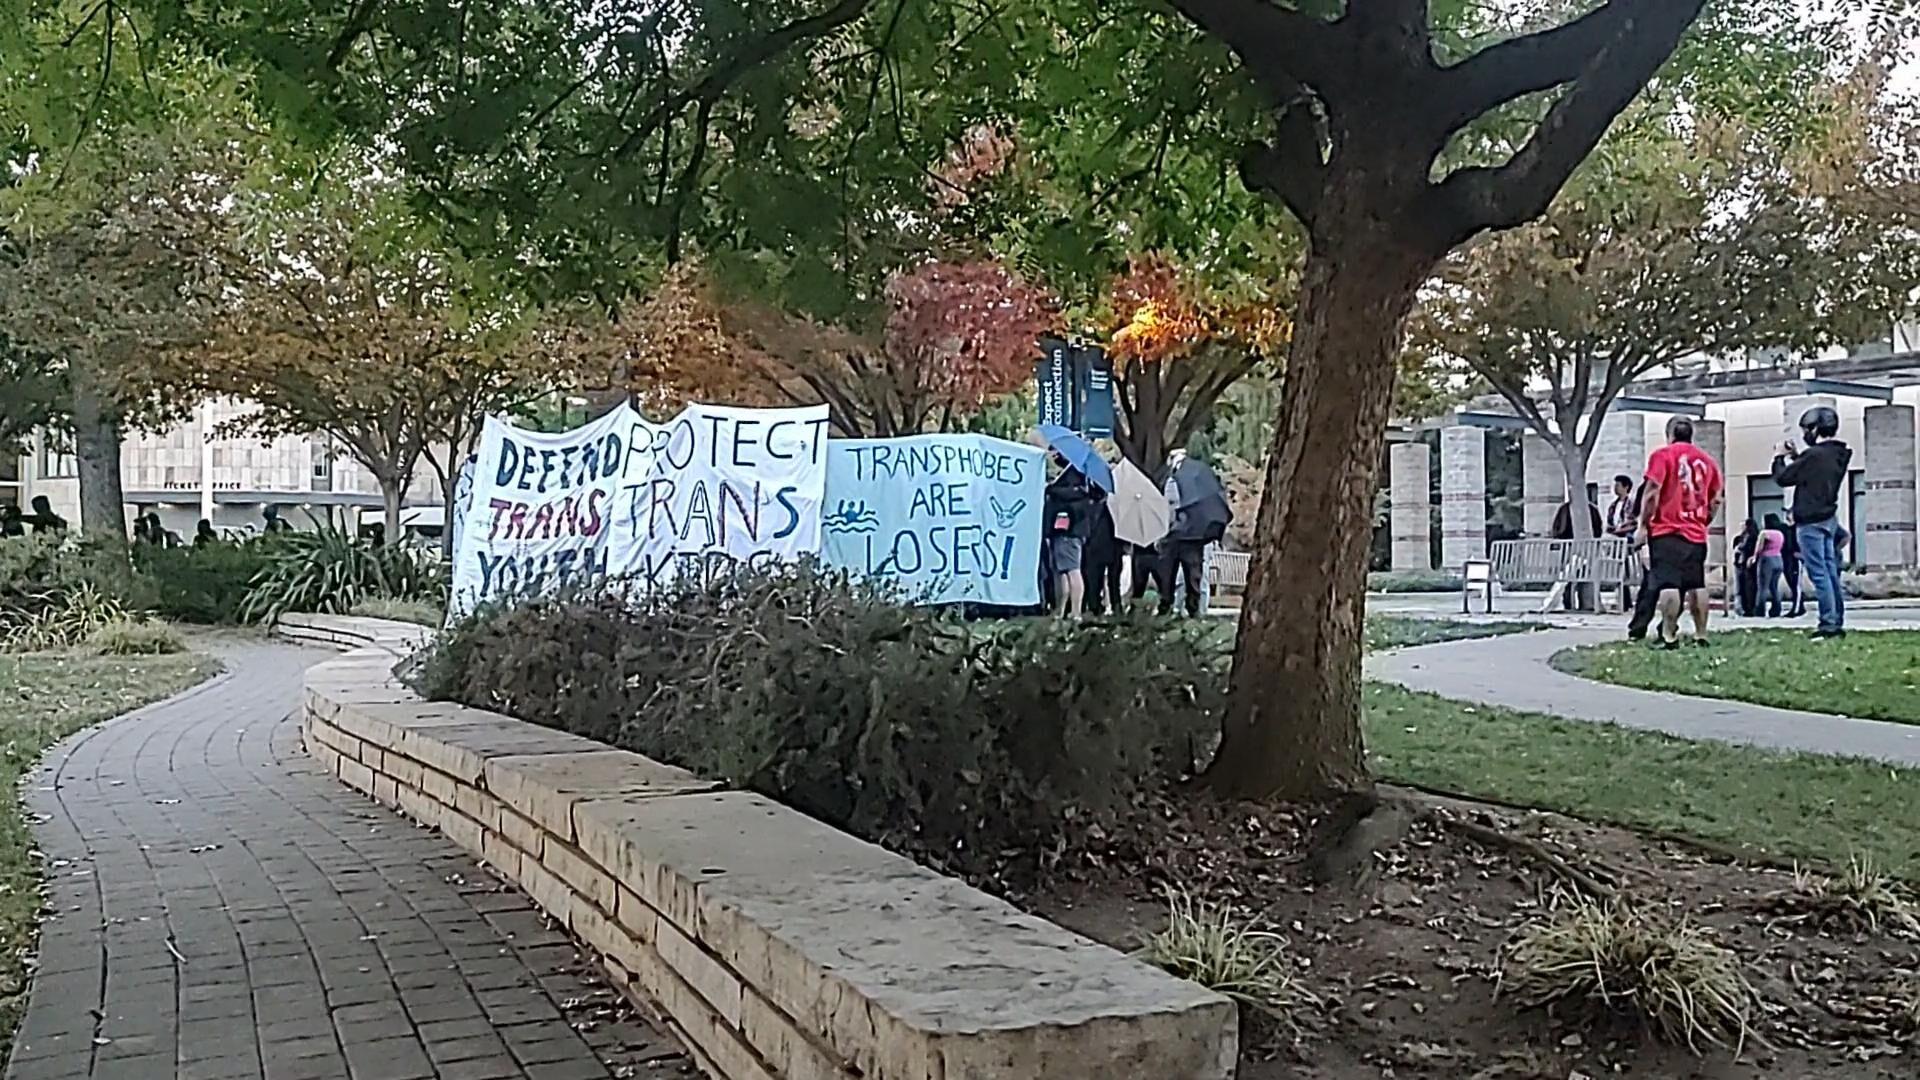 Controversial speaker Riley Gaines expected to spark counter-protests at UC  Davis - CBS Sacramento